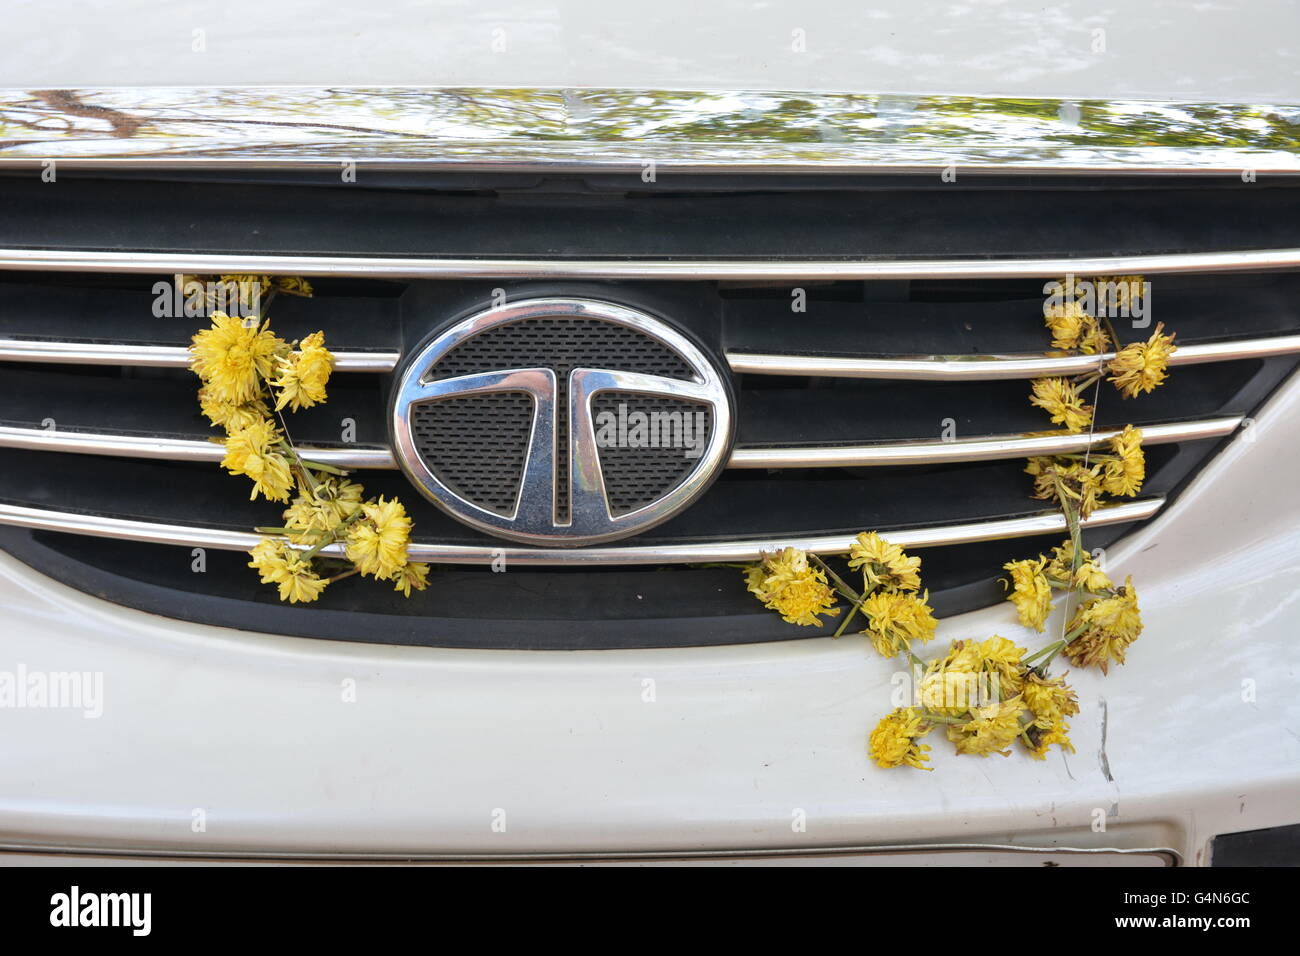 Kochi, India - October 24, 2015 - Flowers on Tata car in India as part of superstition to prevent car accidents Stock Photo